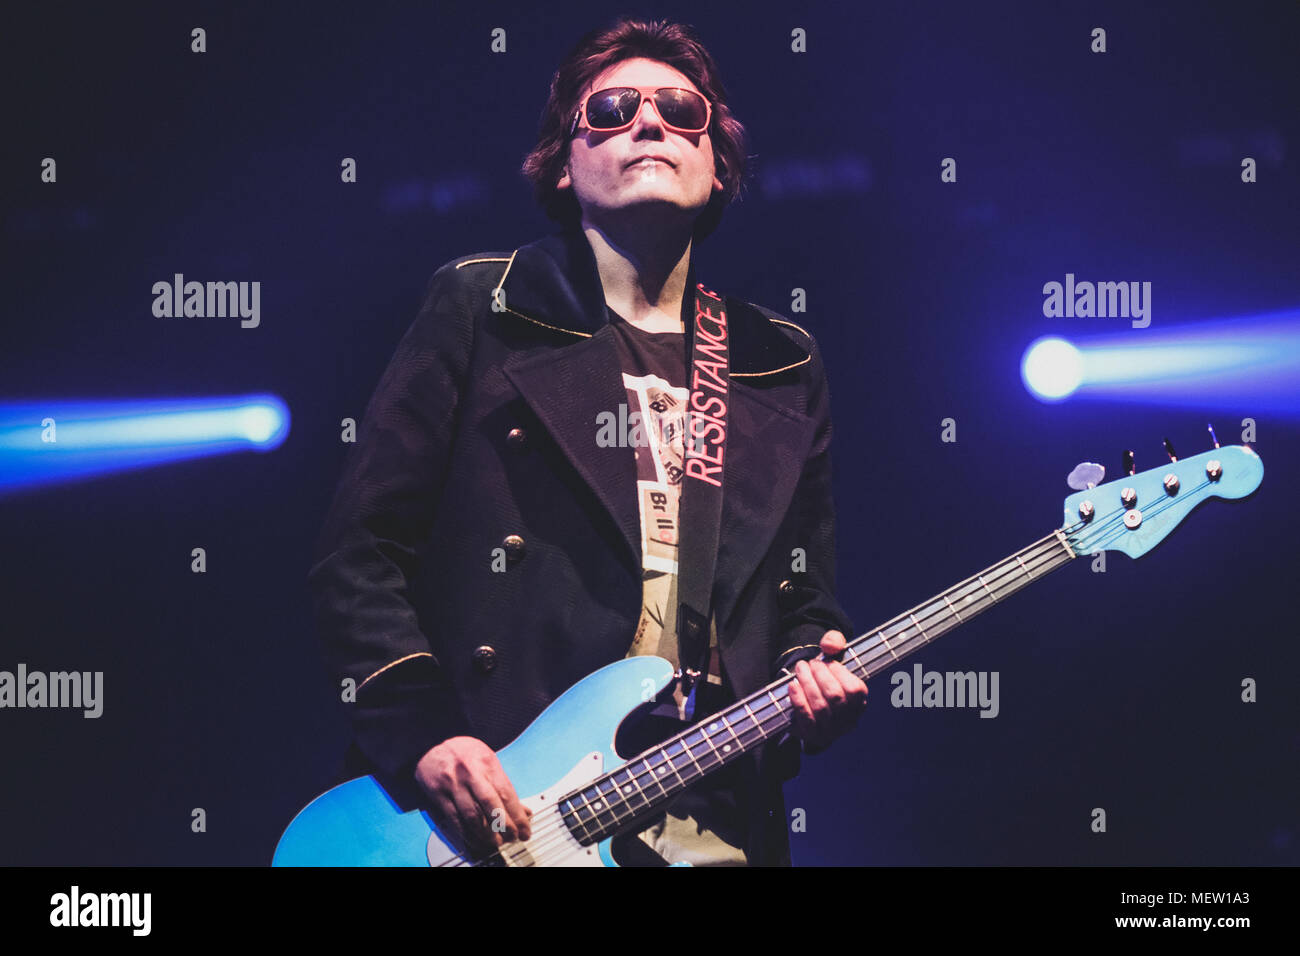 Newcastle, UK. 23rd April, 2018. Welsh rock band Manic Street Preachers perform at Newcastle's MetroRadio Arena on the opening night of their UK tour in support of Resistance Is Futile, their 13th studio album. Credit: Thomas Jackson/Alamy Live News Stock Photo